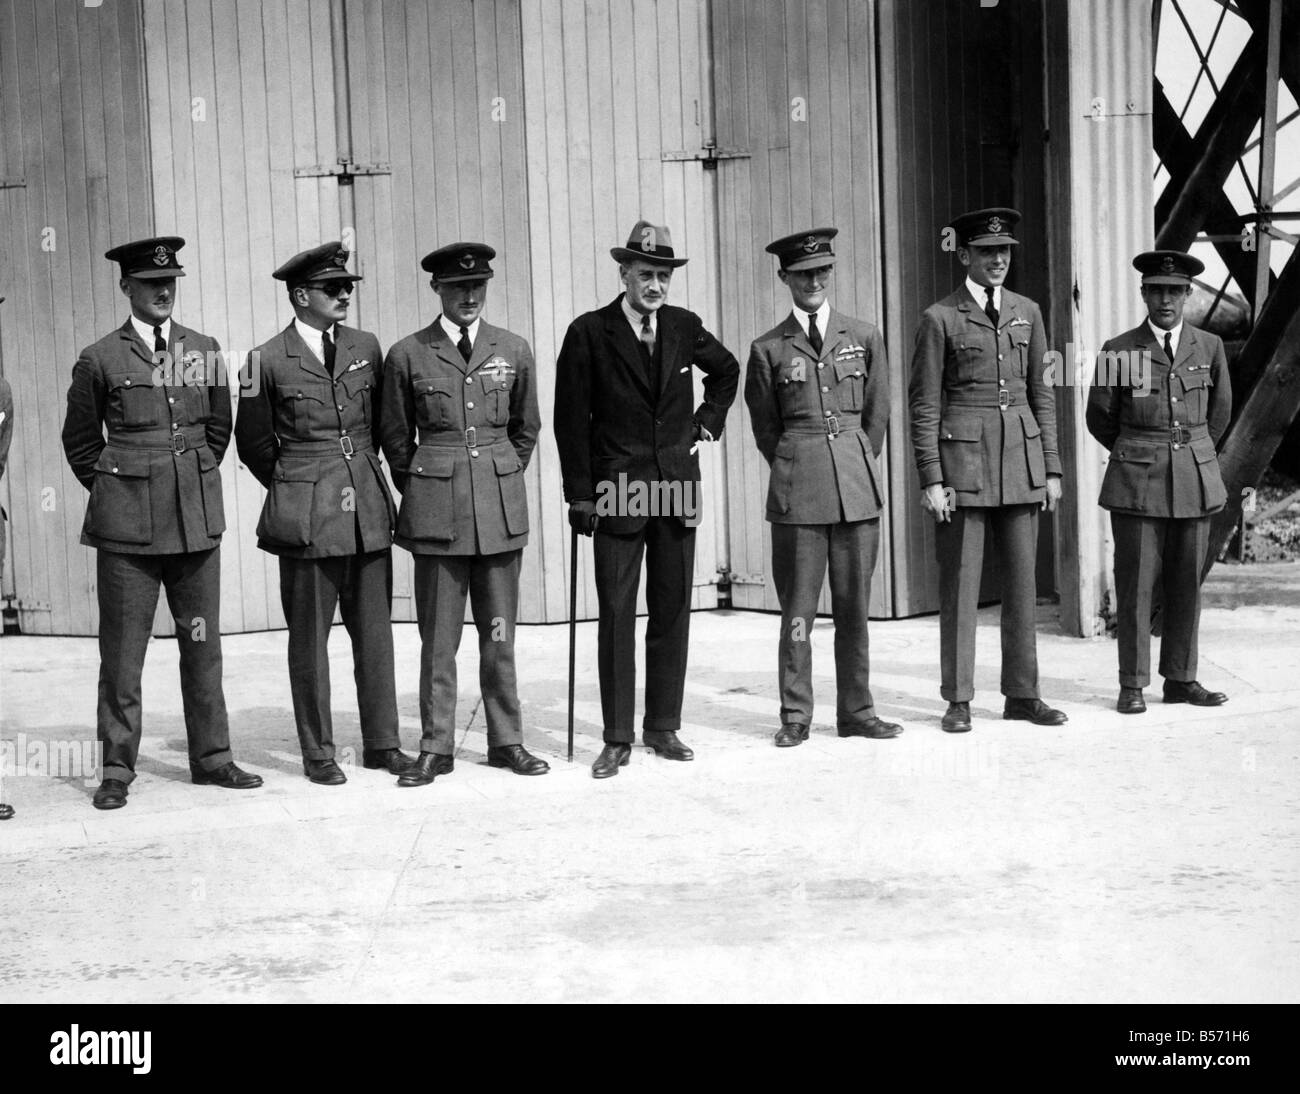 Lord Thomson who was killed in the R101 airship disaster in Northern France, seen here with British Airforce officers. Circa 192 Stock Photo